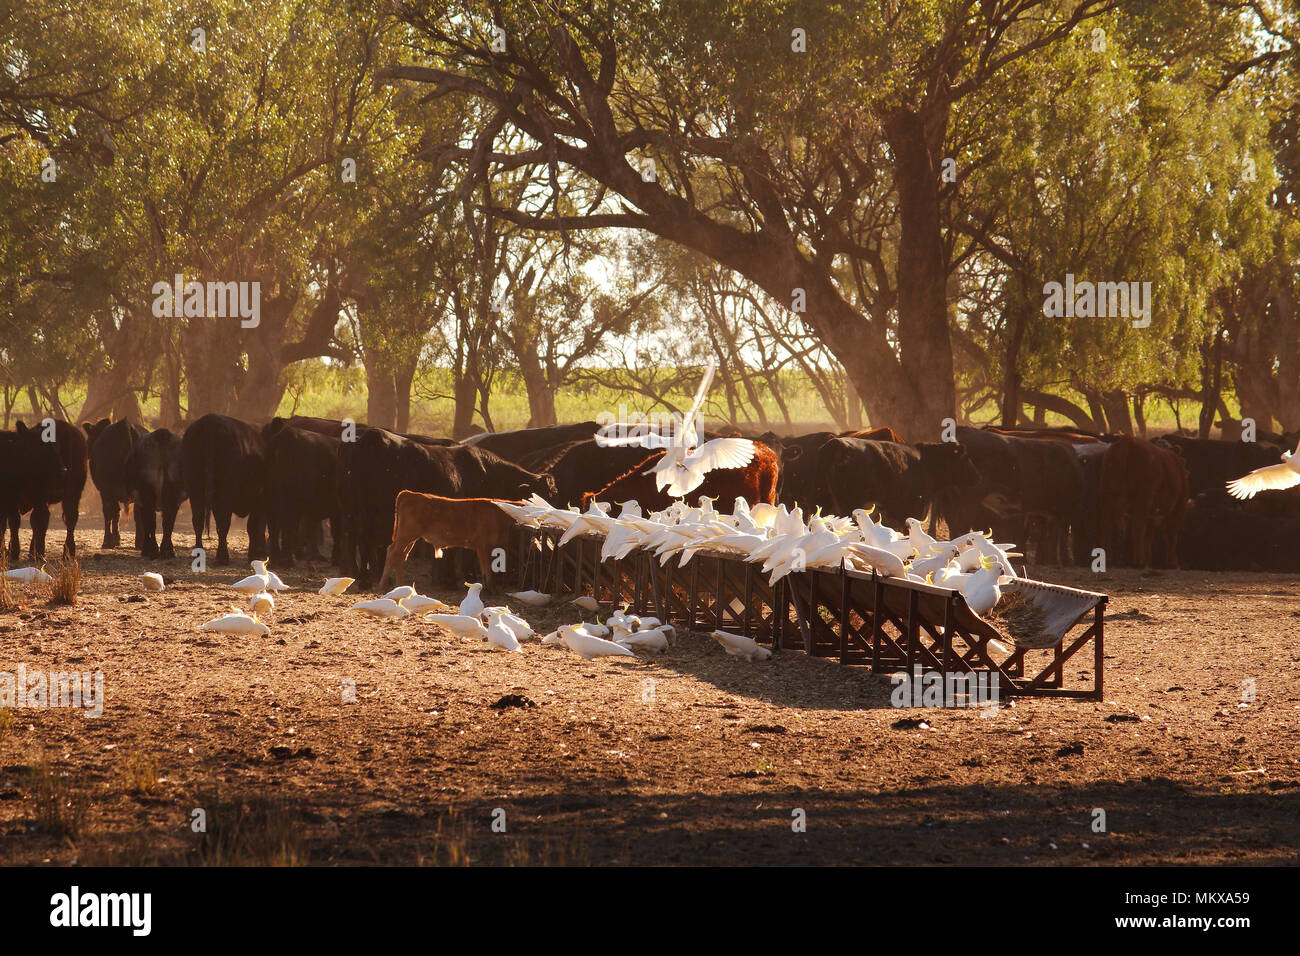 The cattle gather under the shade of the gums trees in the early morning of rural New South Wales whilst the cockatoos steal a feed. Stock Photo